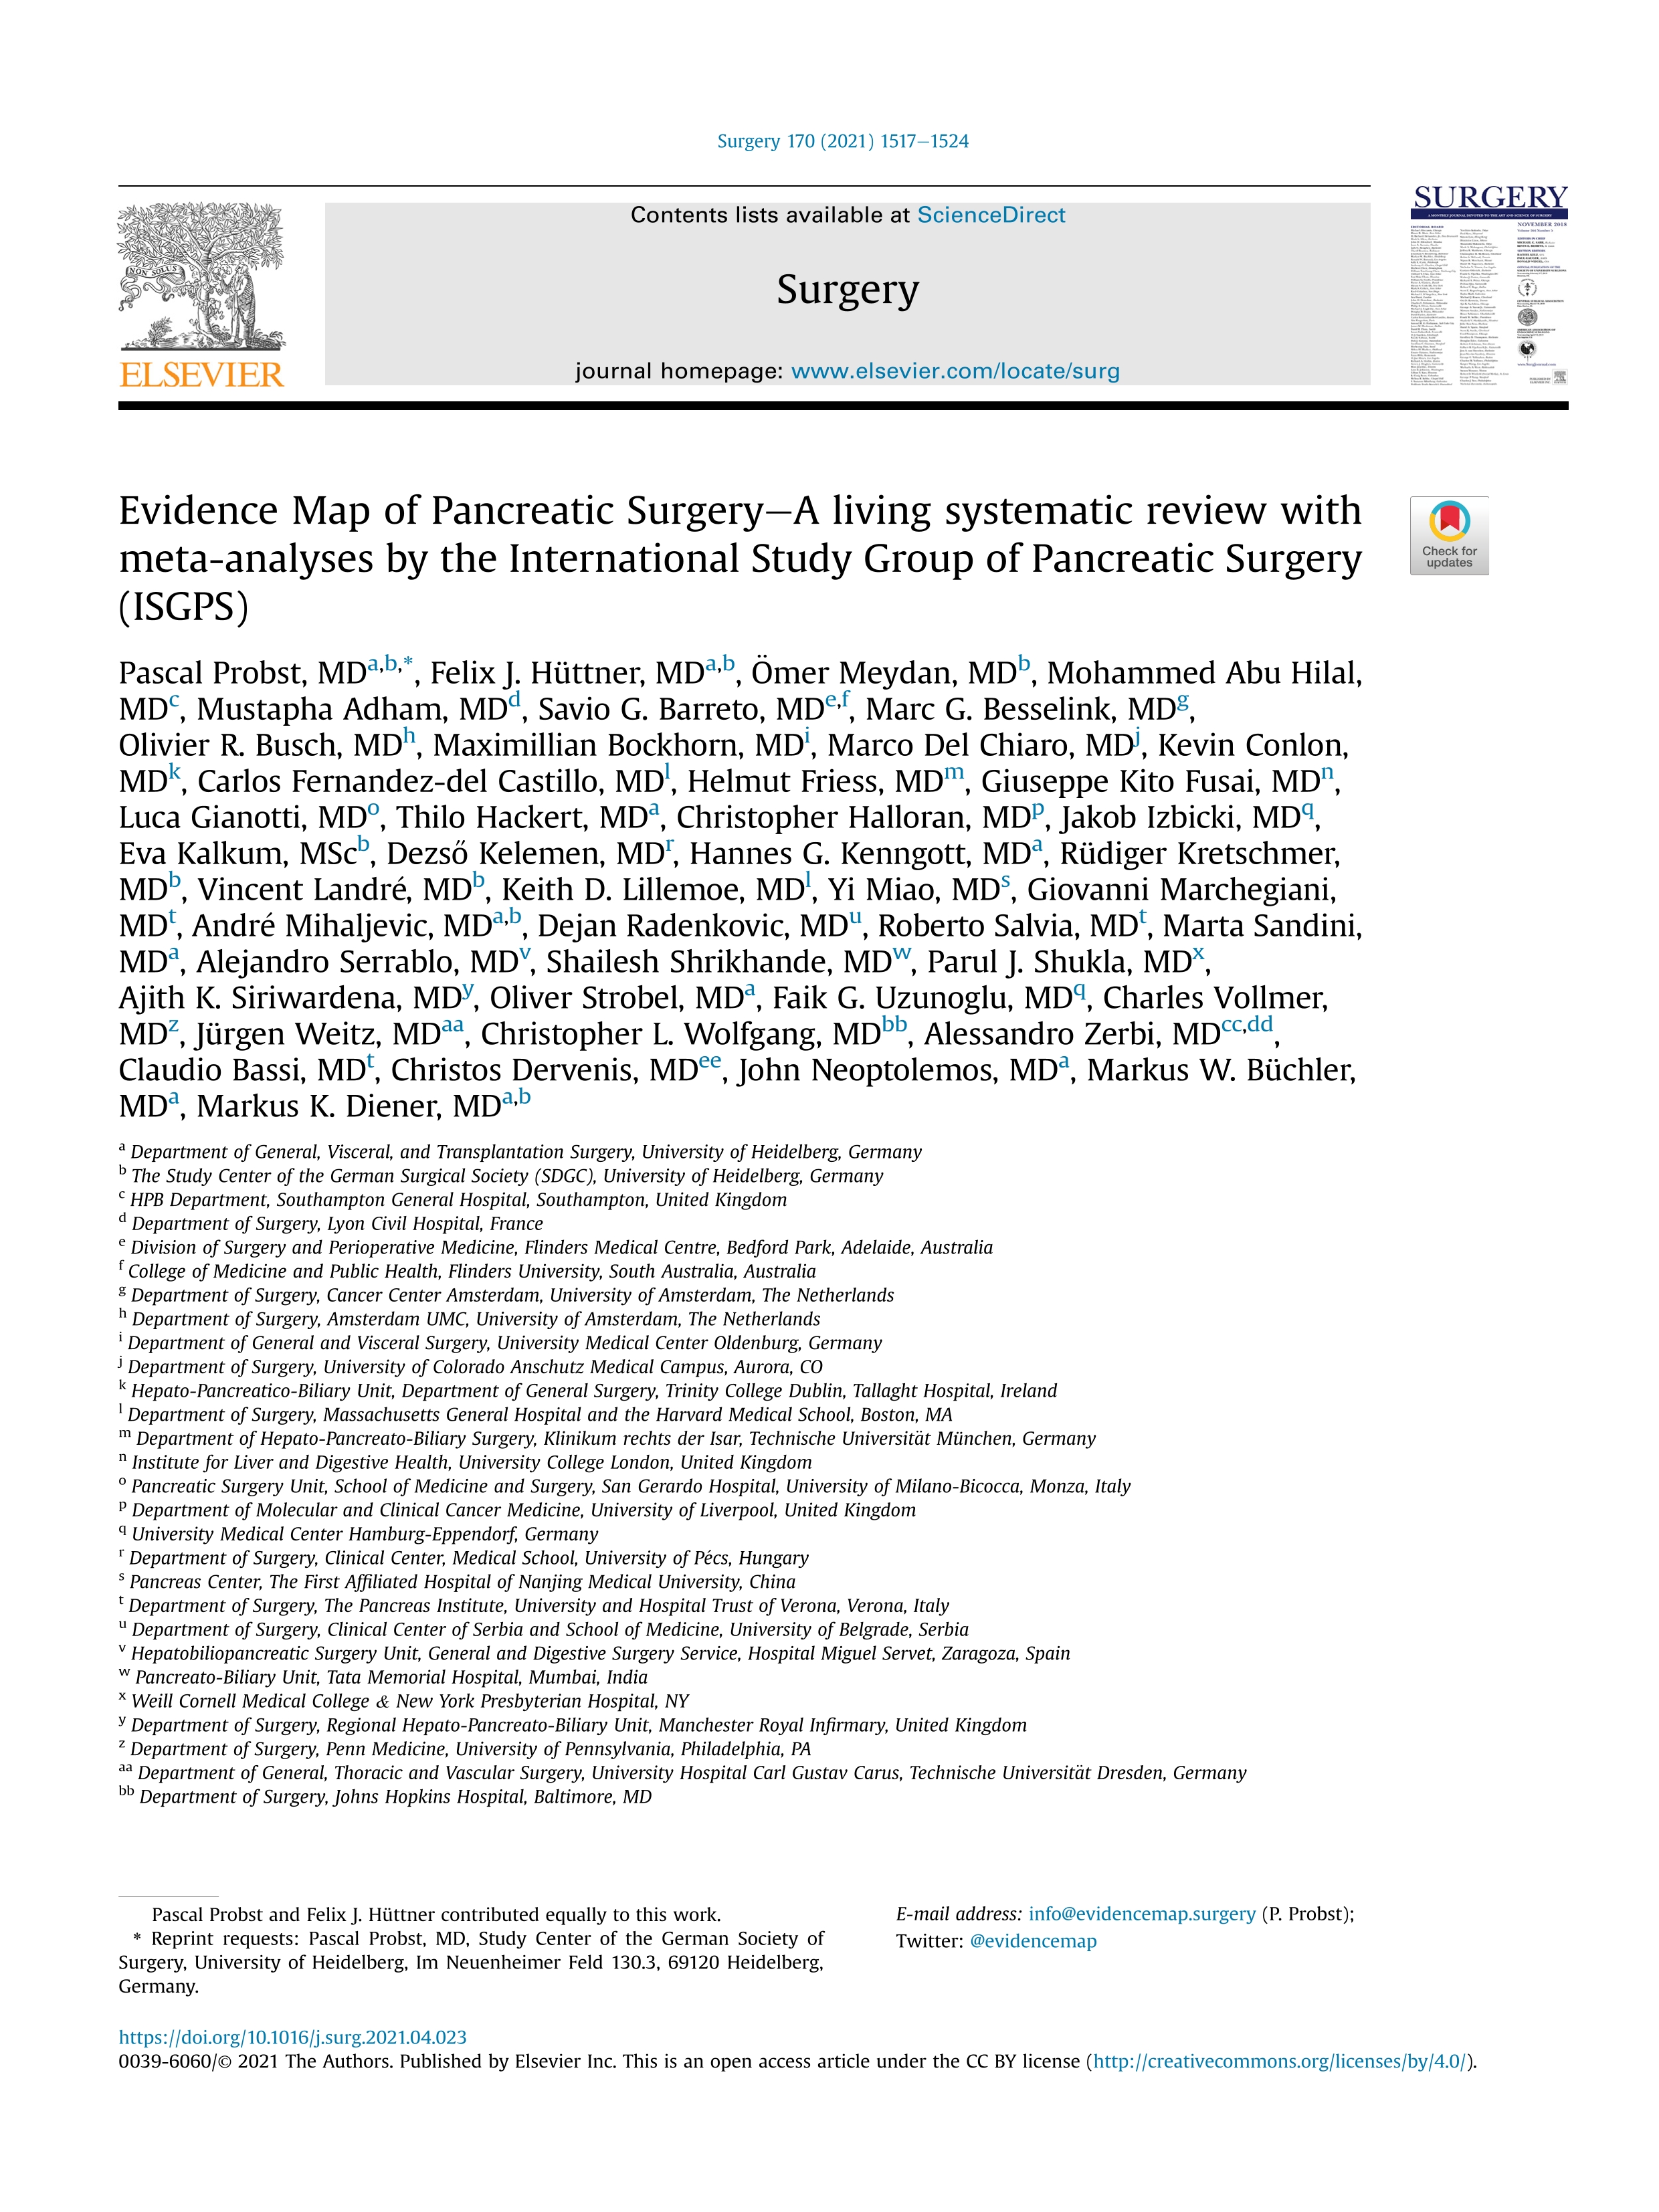 Evidence Map of Pancreatic Surgery–A living systematic review with meta-analyses by the International Study Group of Pancreatic Surgery (ISGPS)